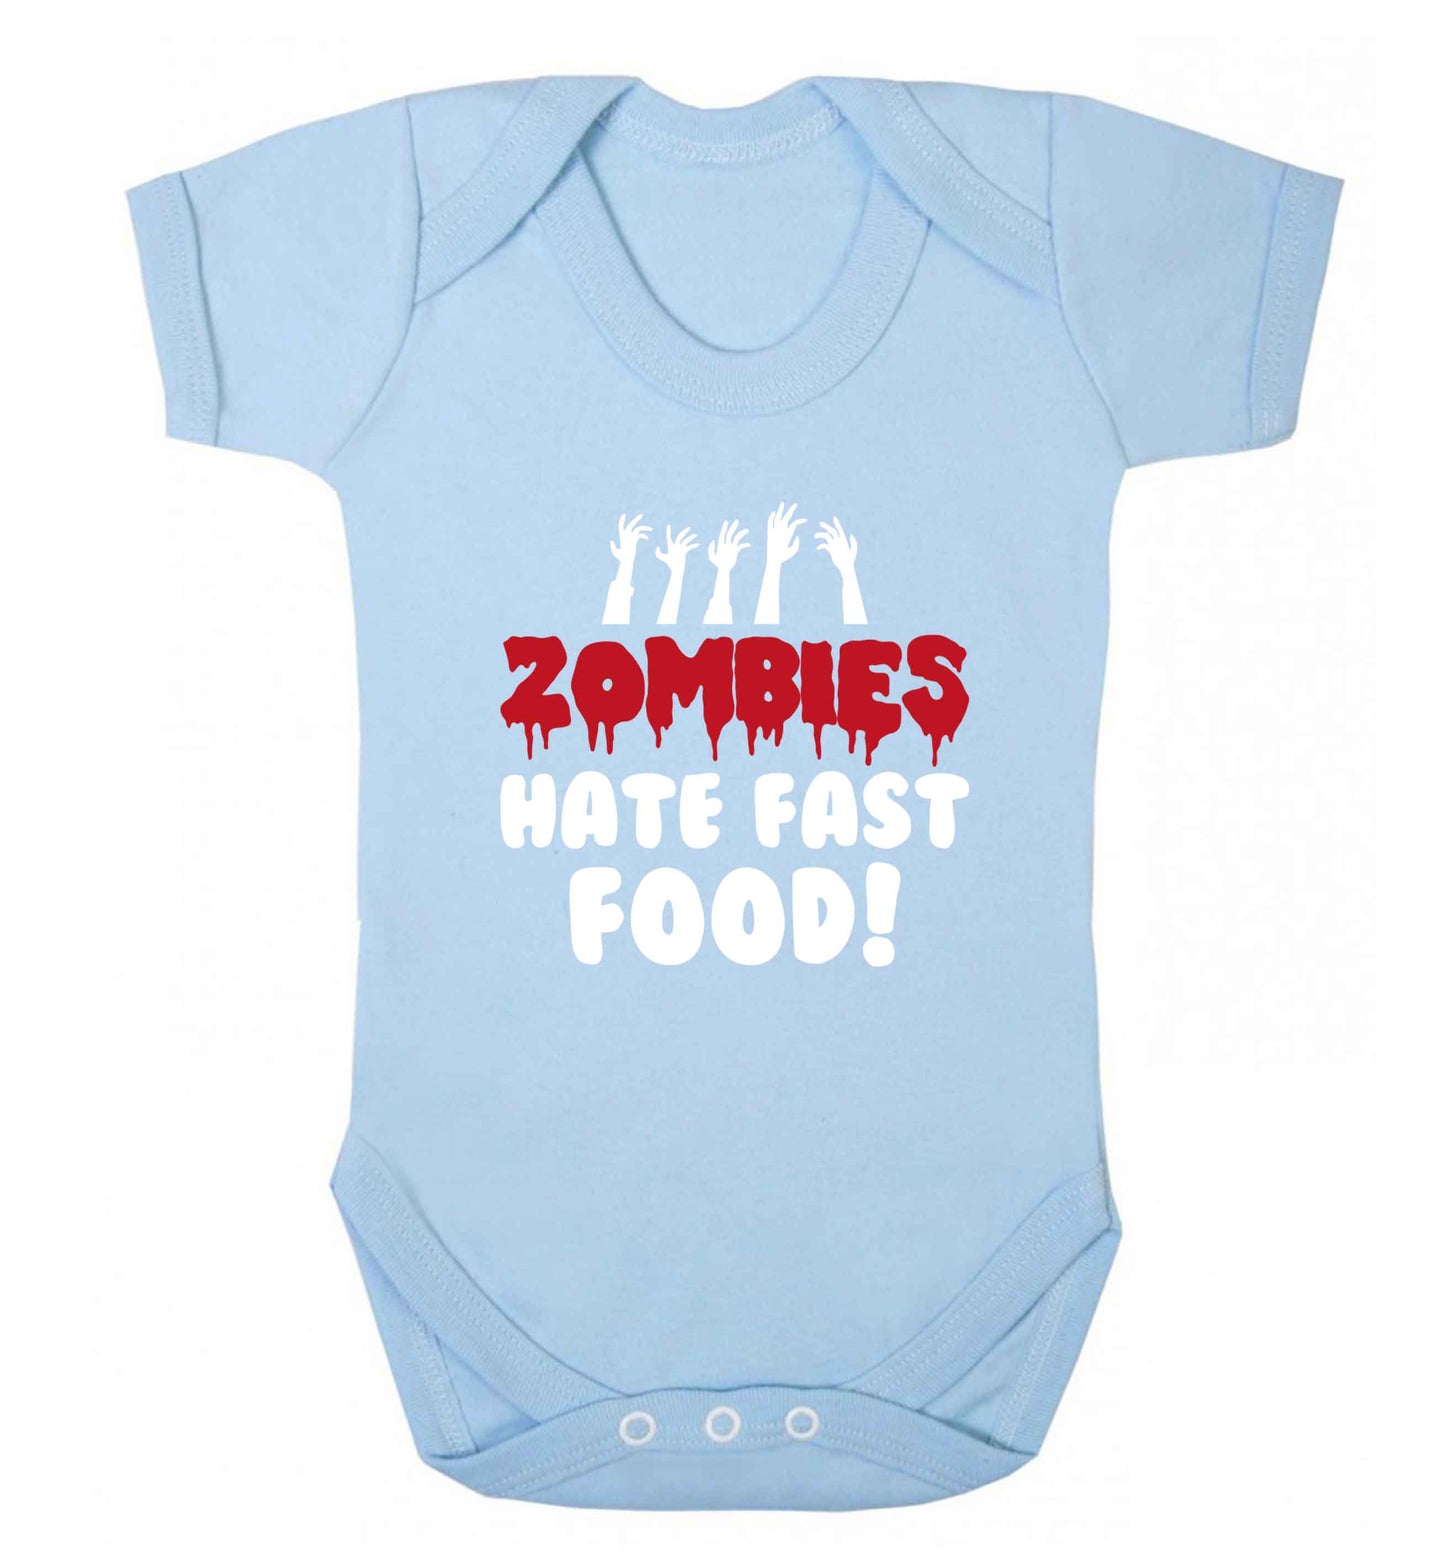 Zombies hate fast food baby vest pale blue 18-24 months